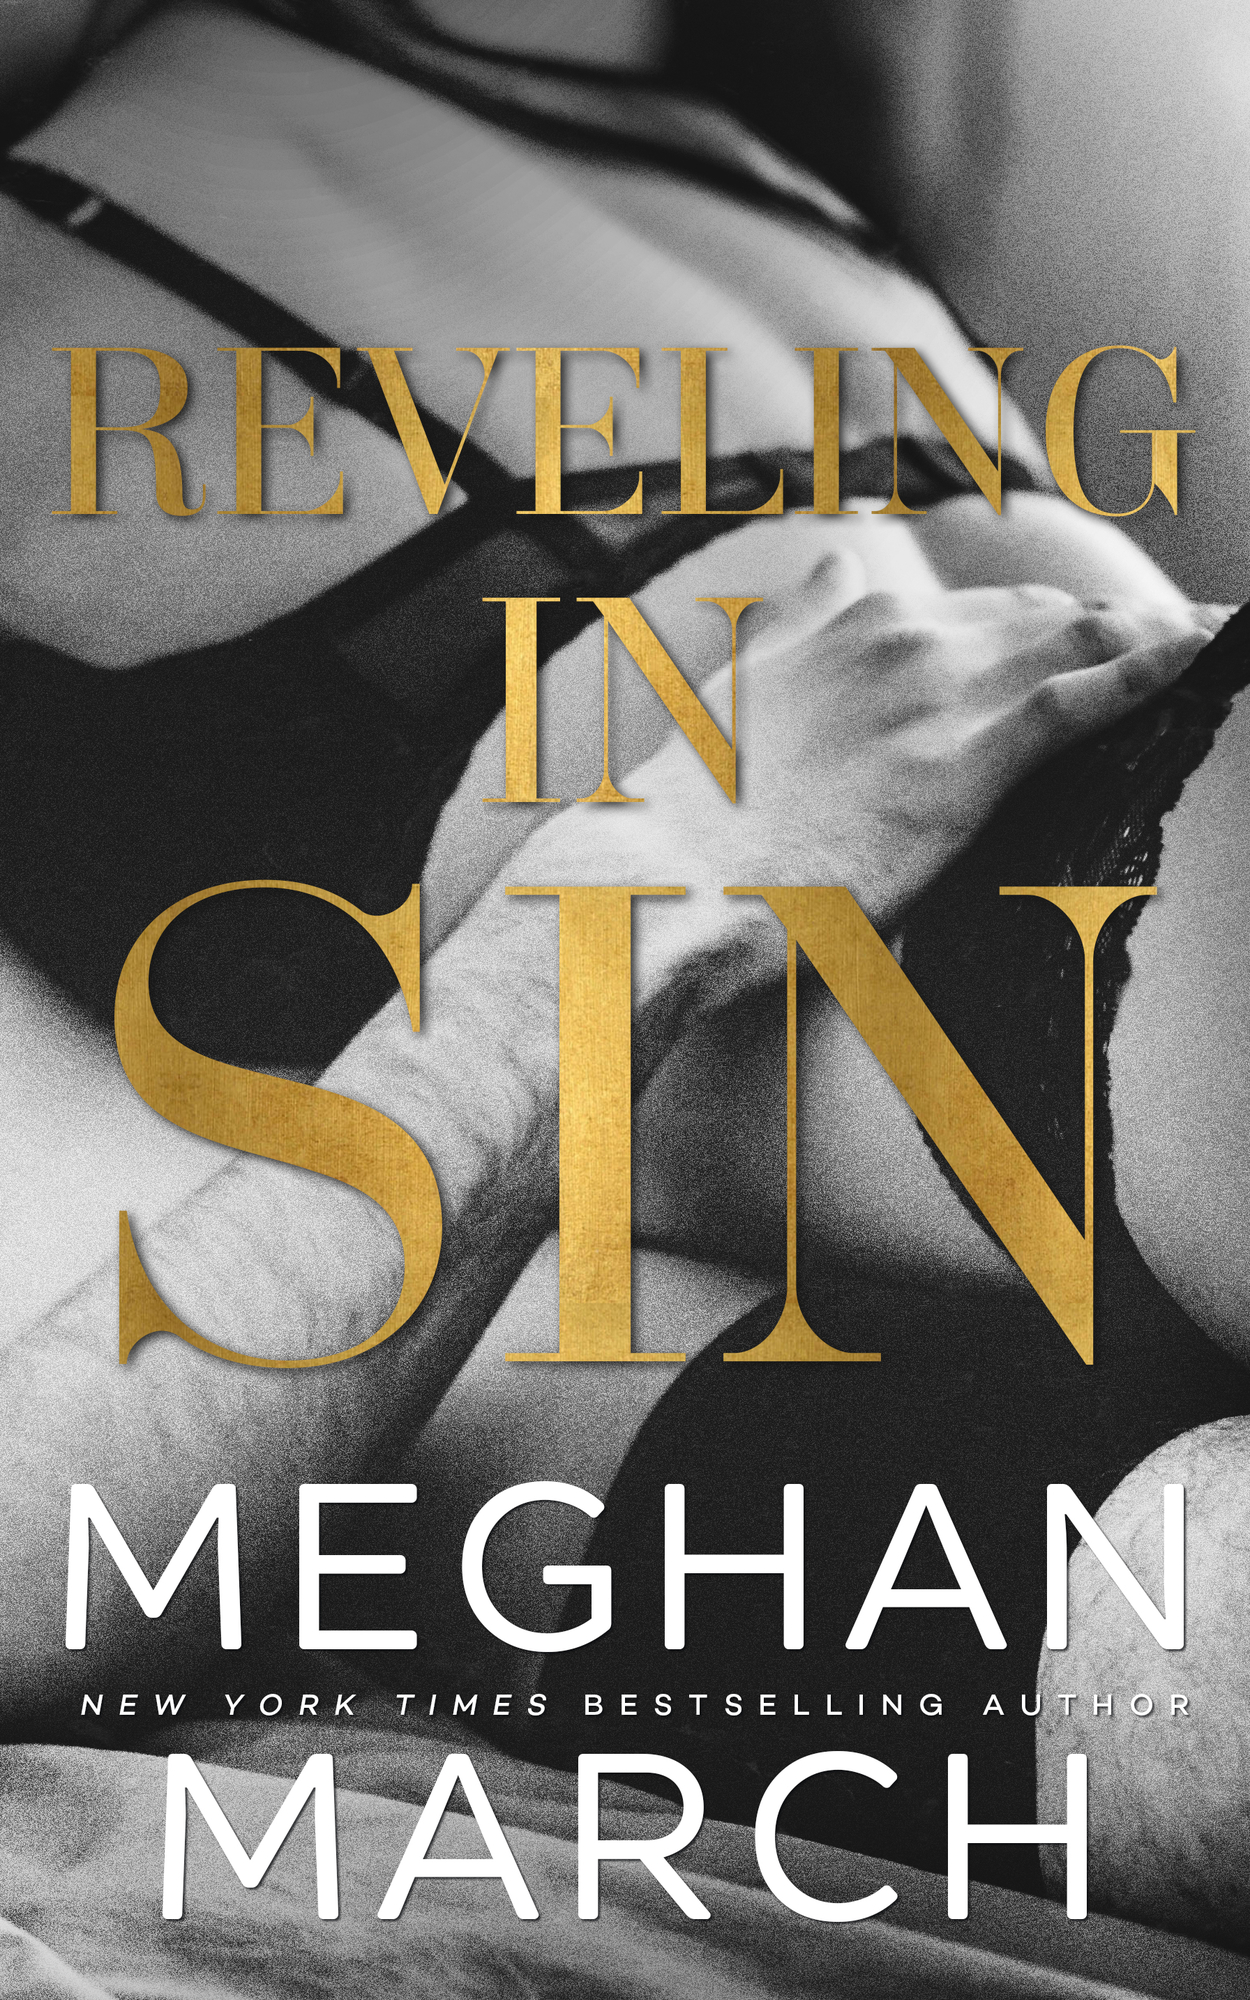 Revealing as Sin by Meghan March [Review]